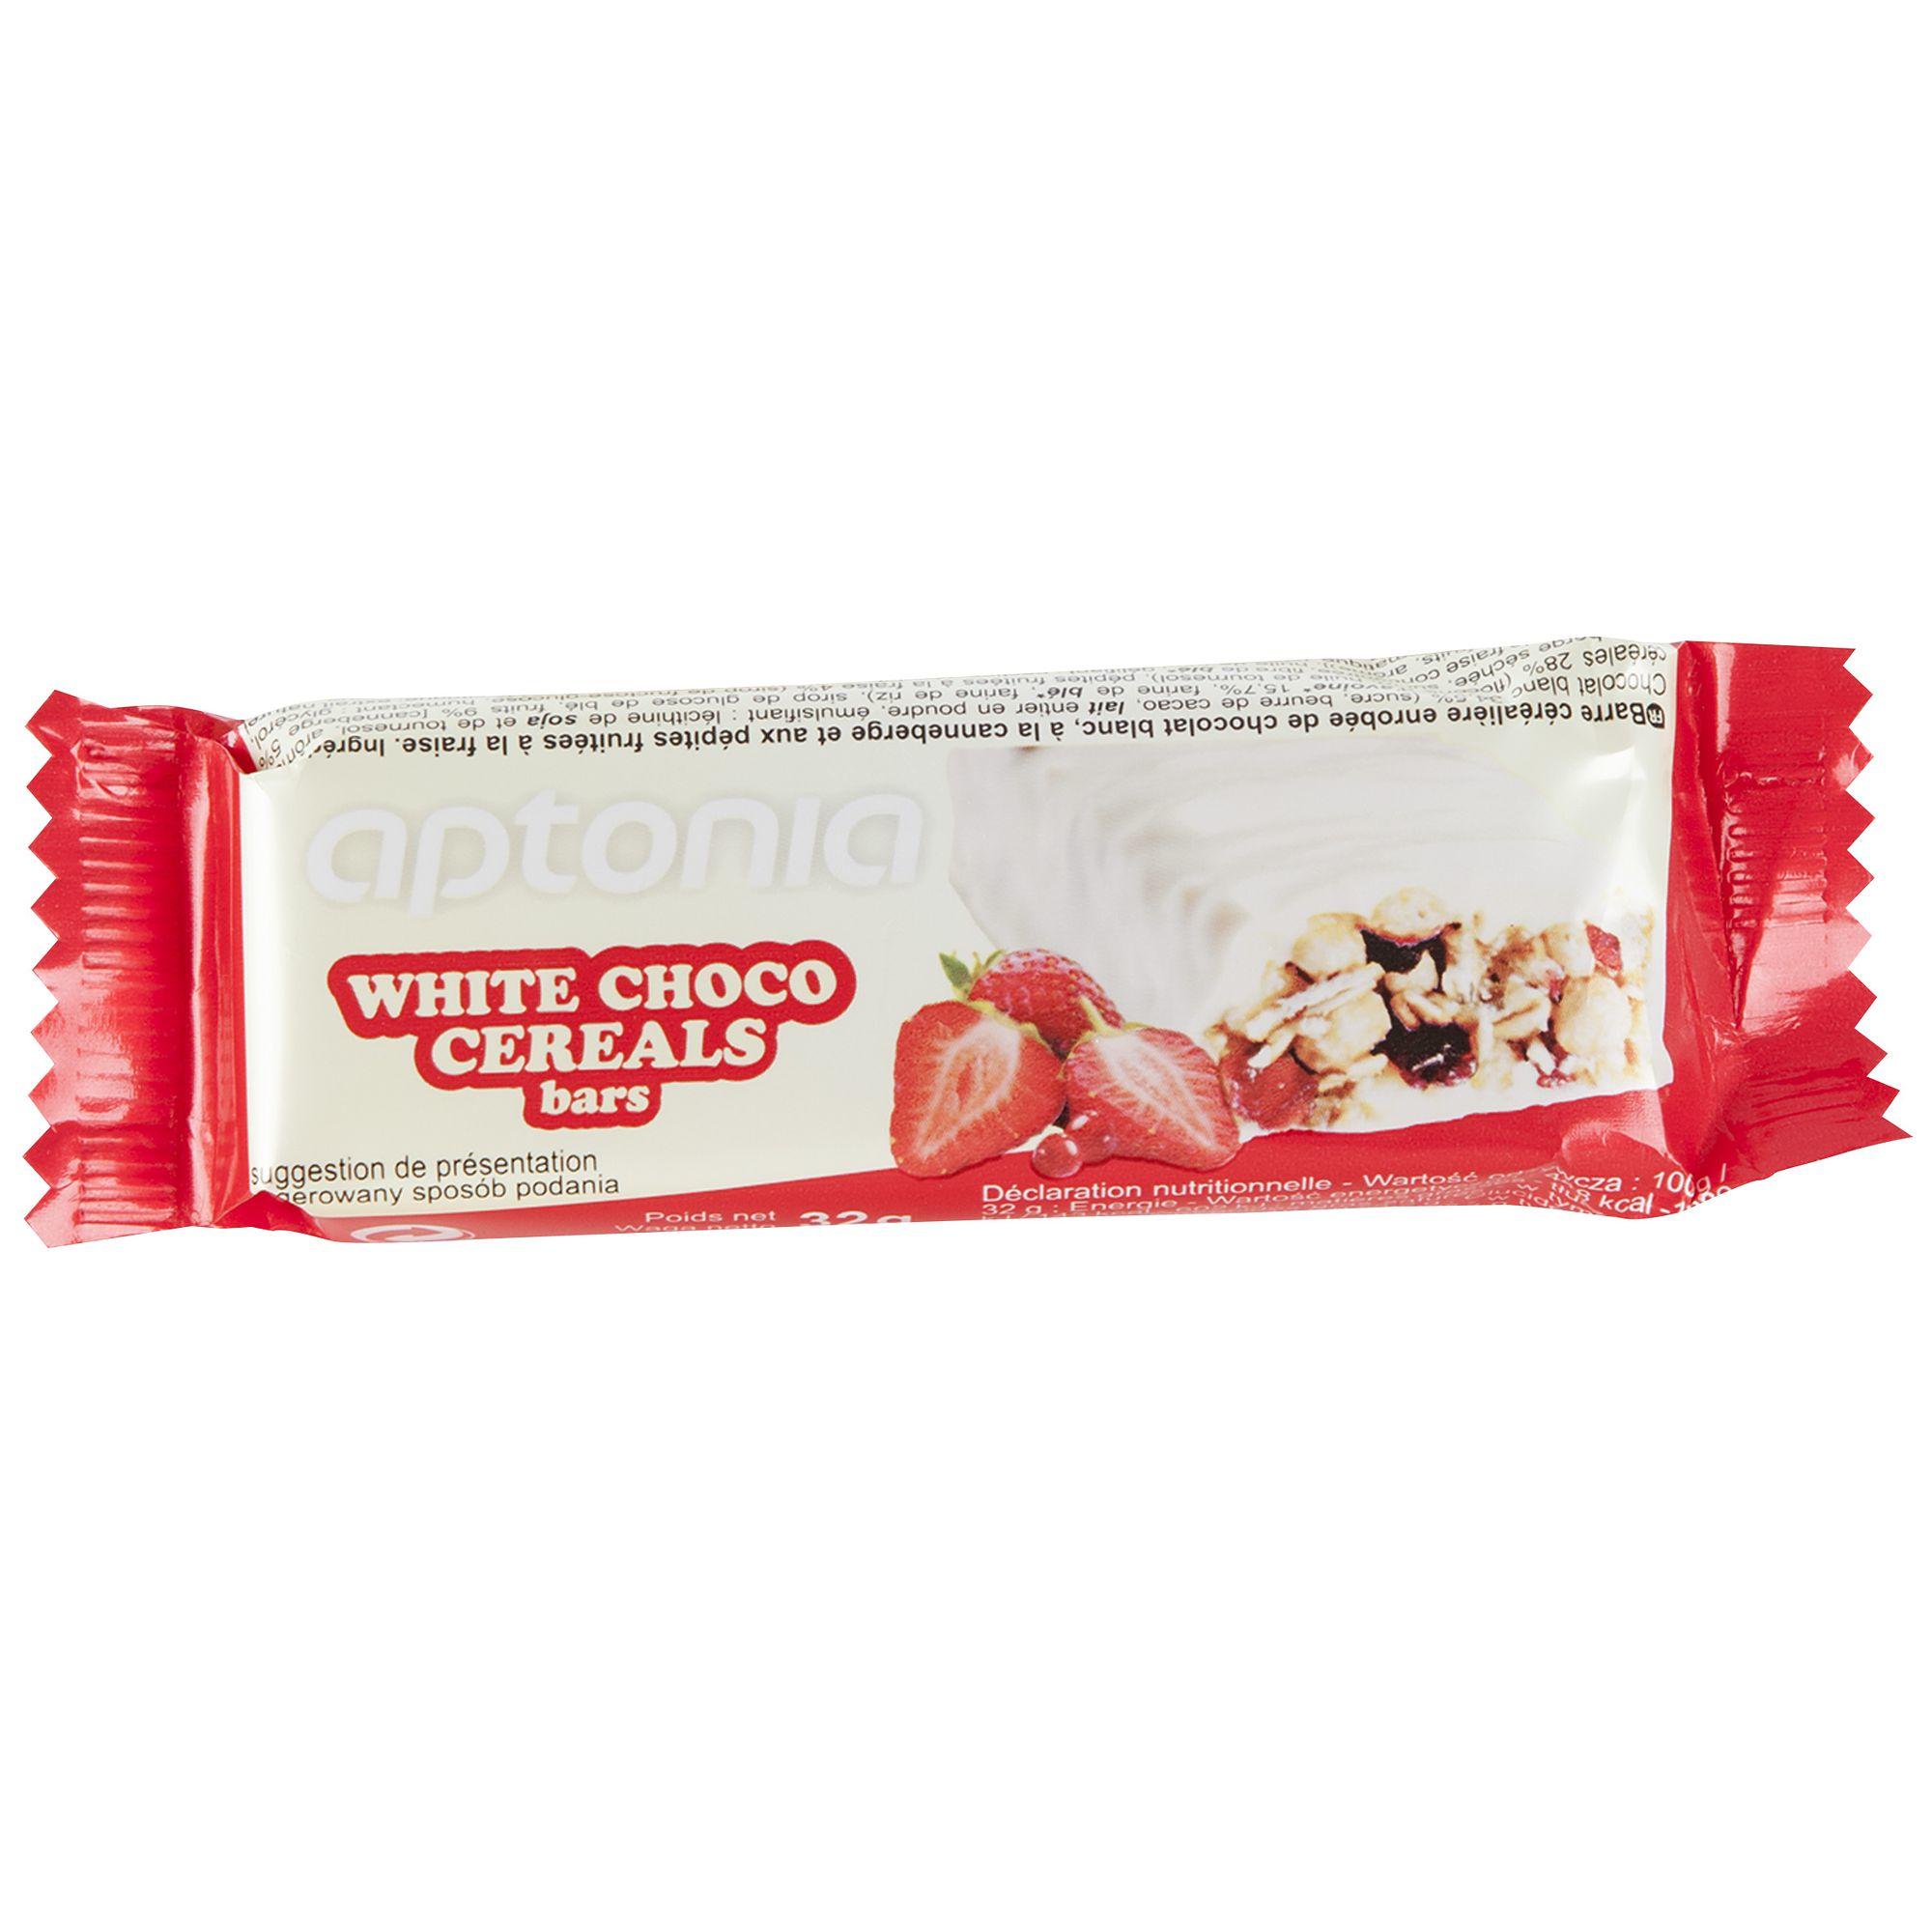 APTONIA Choco Cereals White Chocolate Coated Cereal Bar 32g - Red Berries